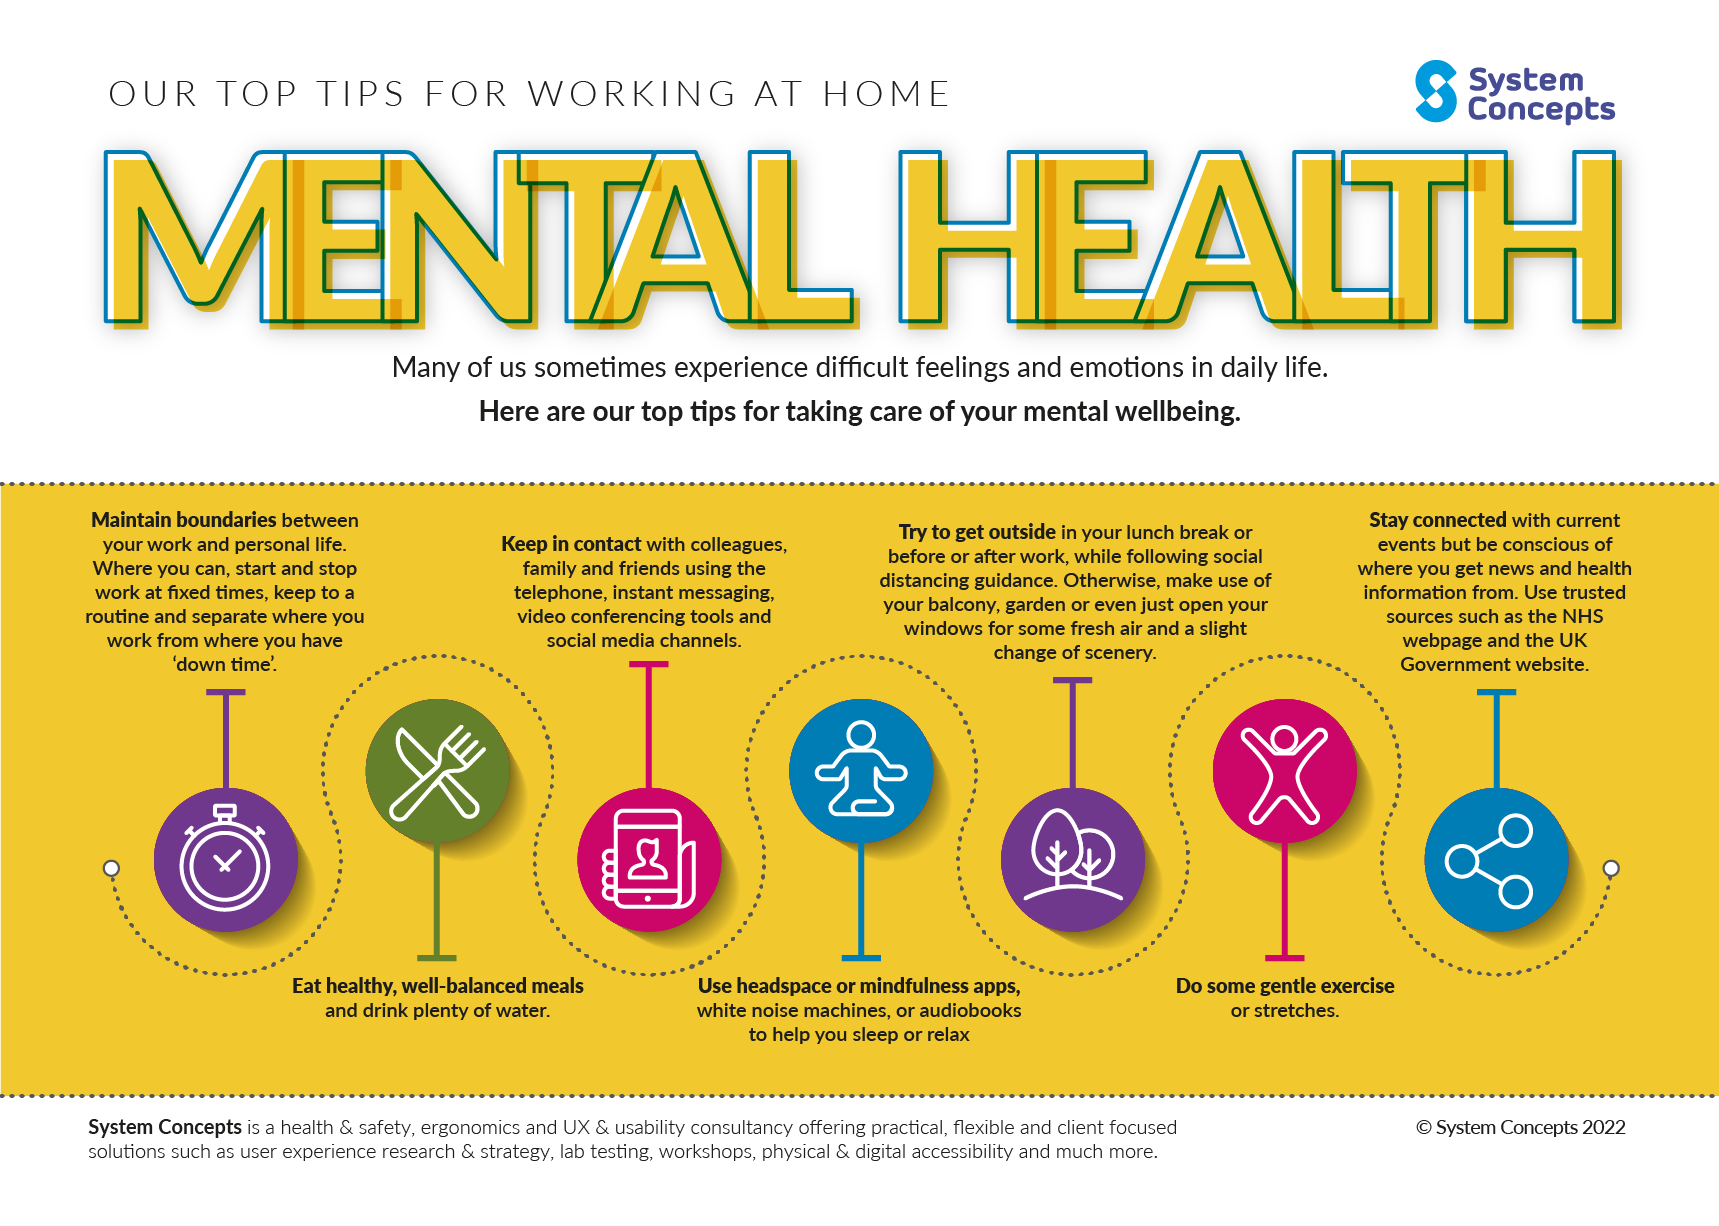 (alt="Working from home infographic, our top tips for mental health")